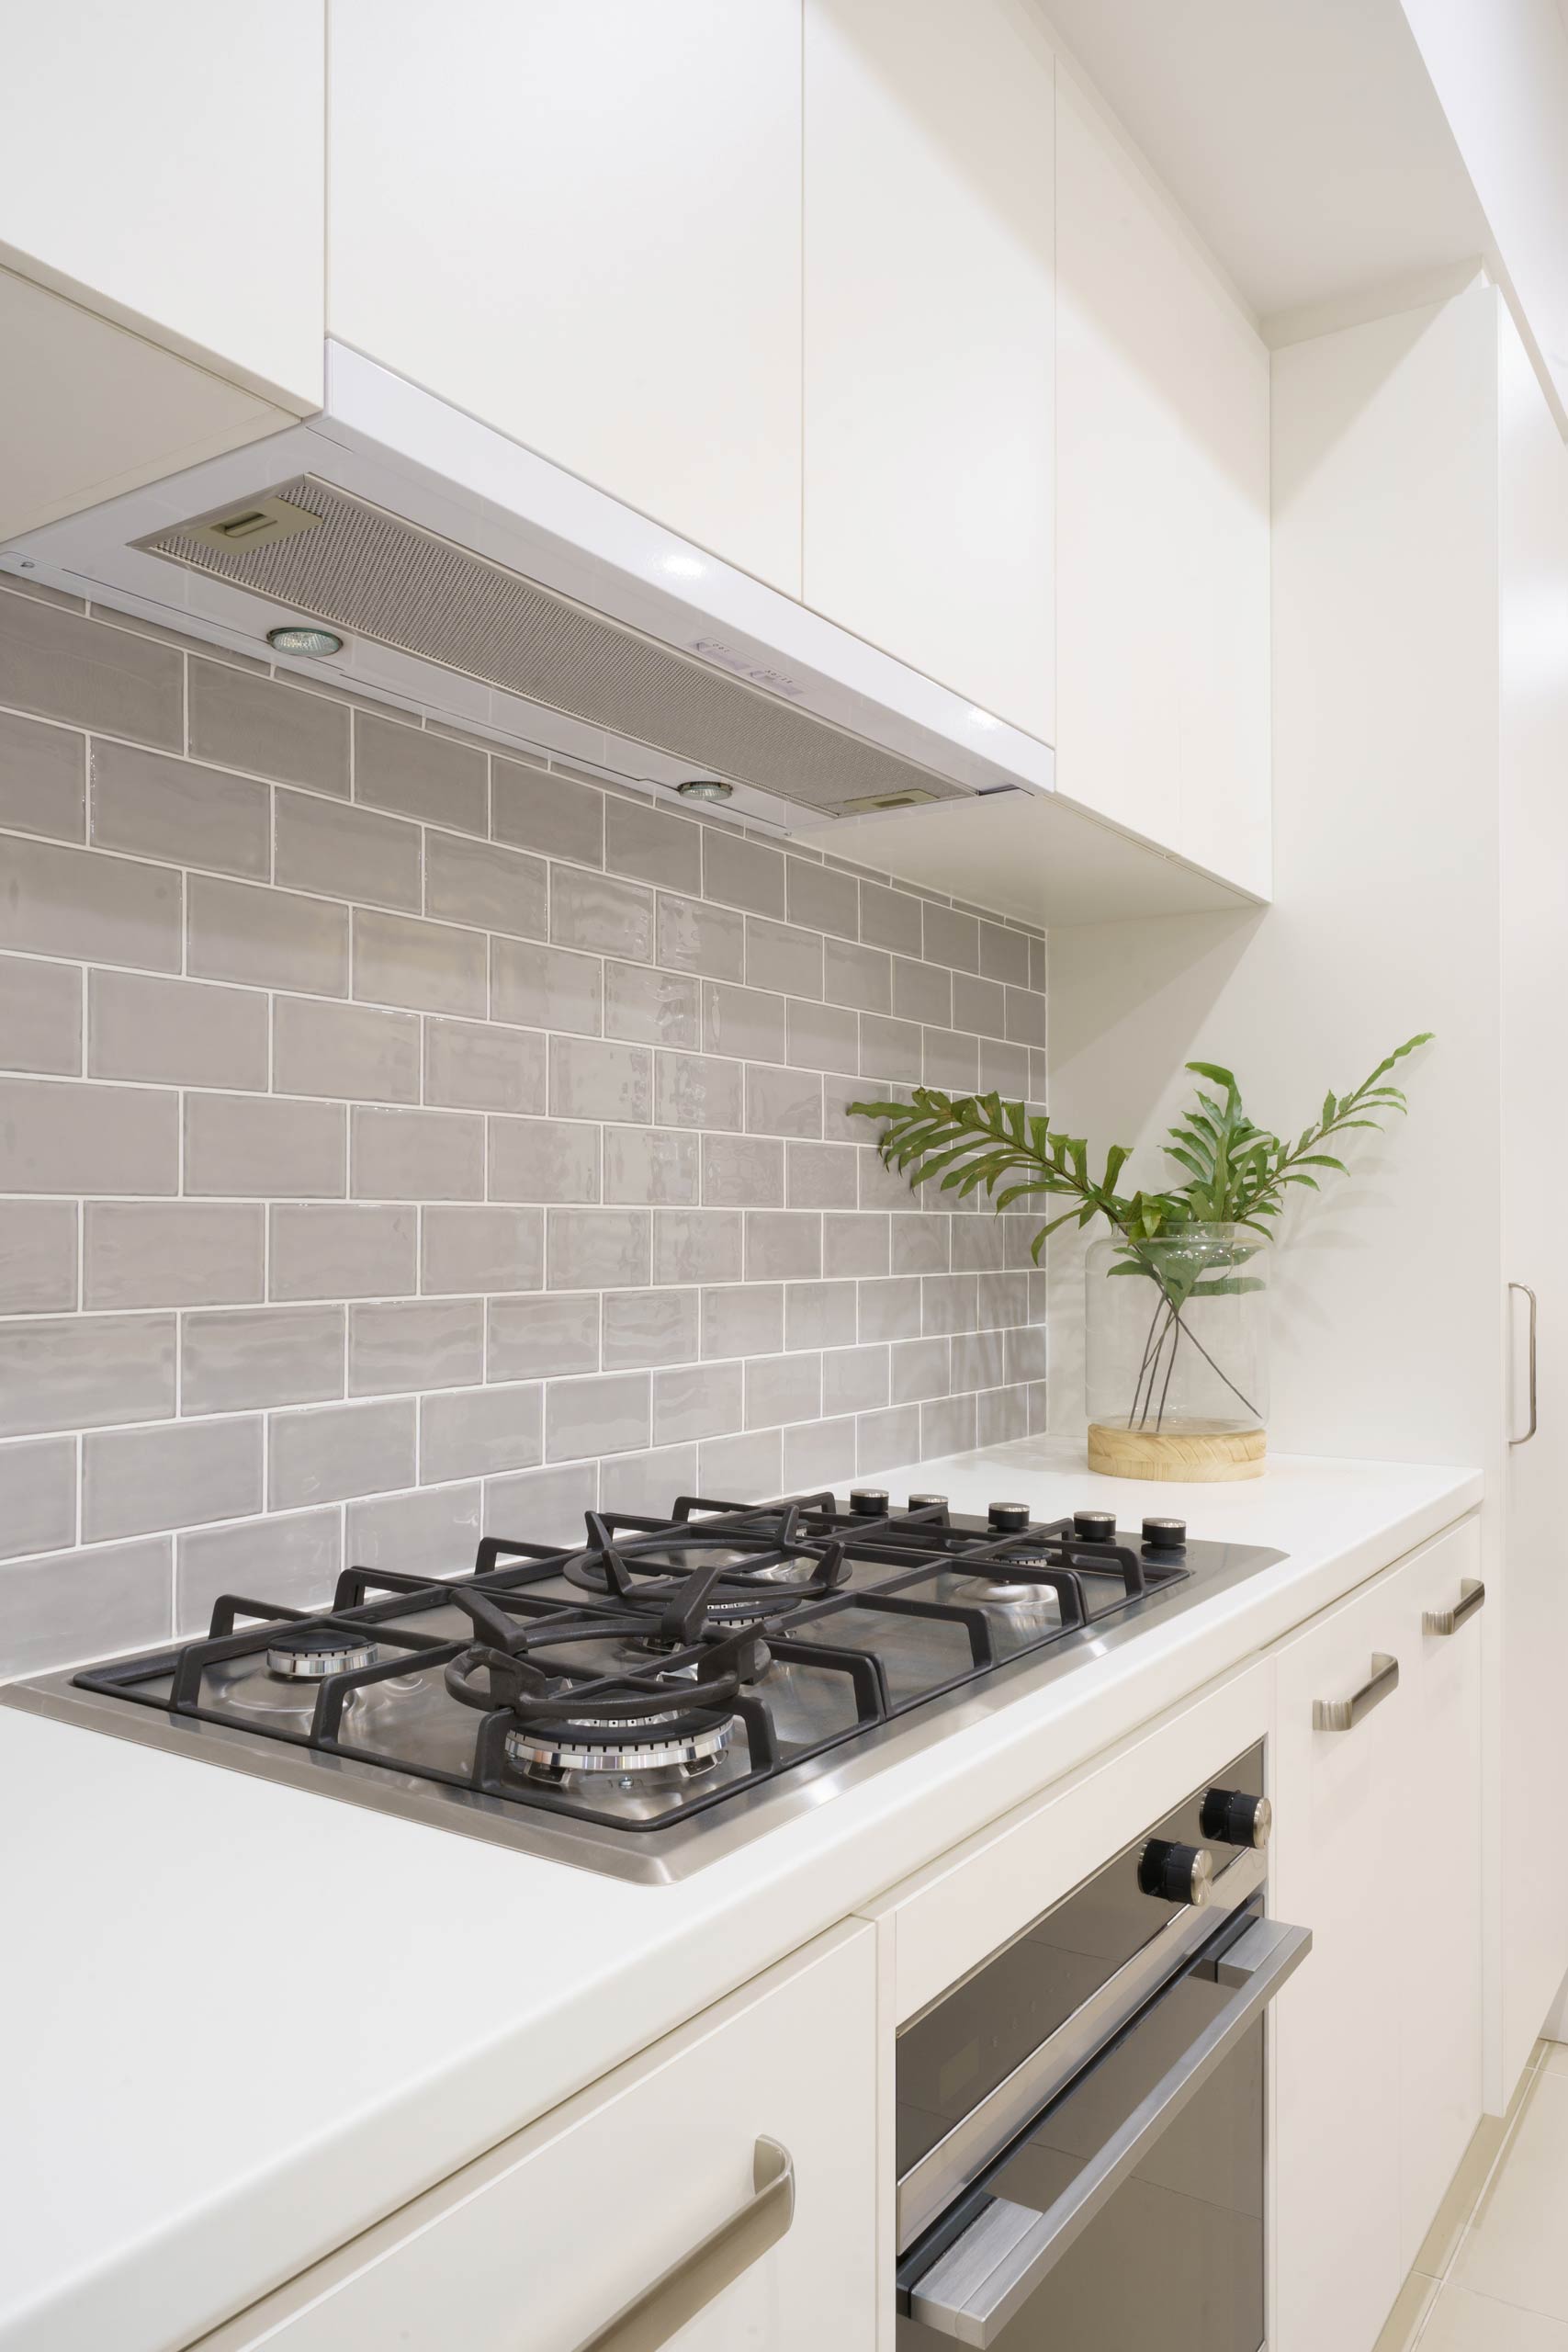 White Kitchen with grey subway tiles in brick bond pattern. Pull out undermount rangehood with gas cooktop and electric oven